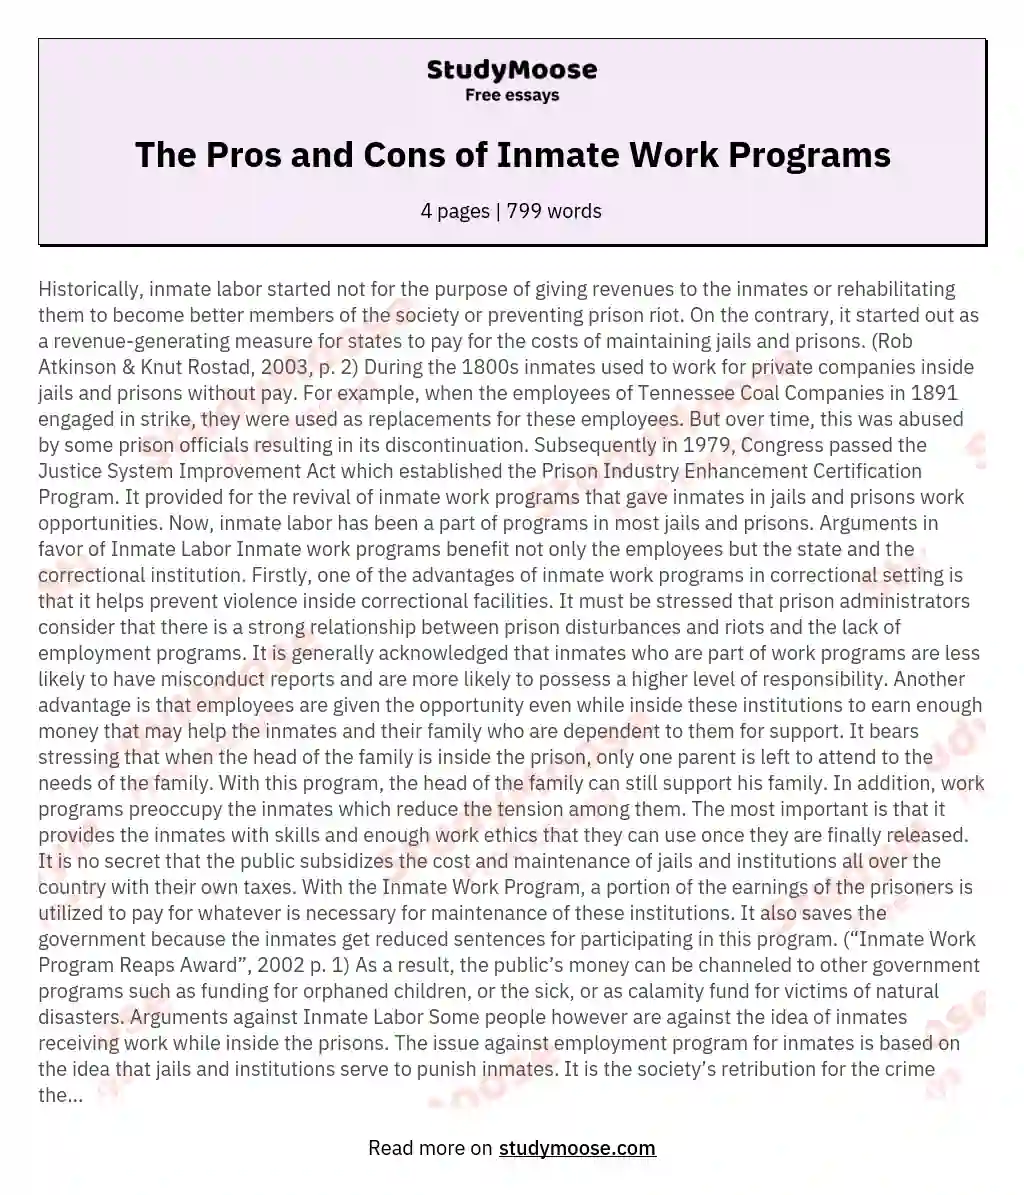 The Pros and Cons of Inmate Work Programs essay